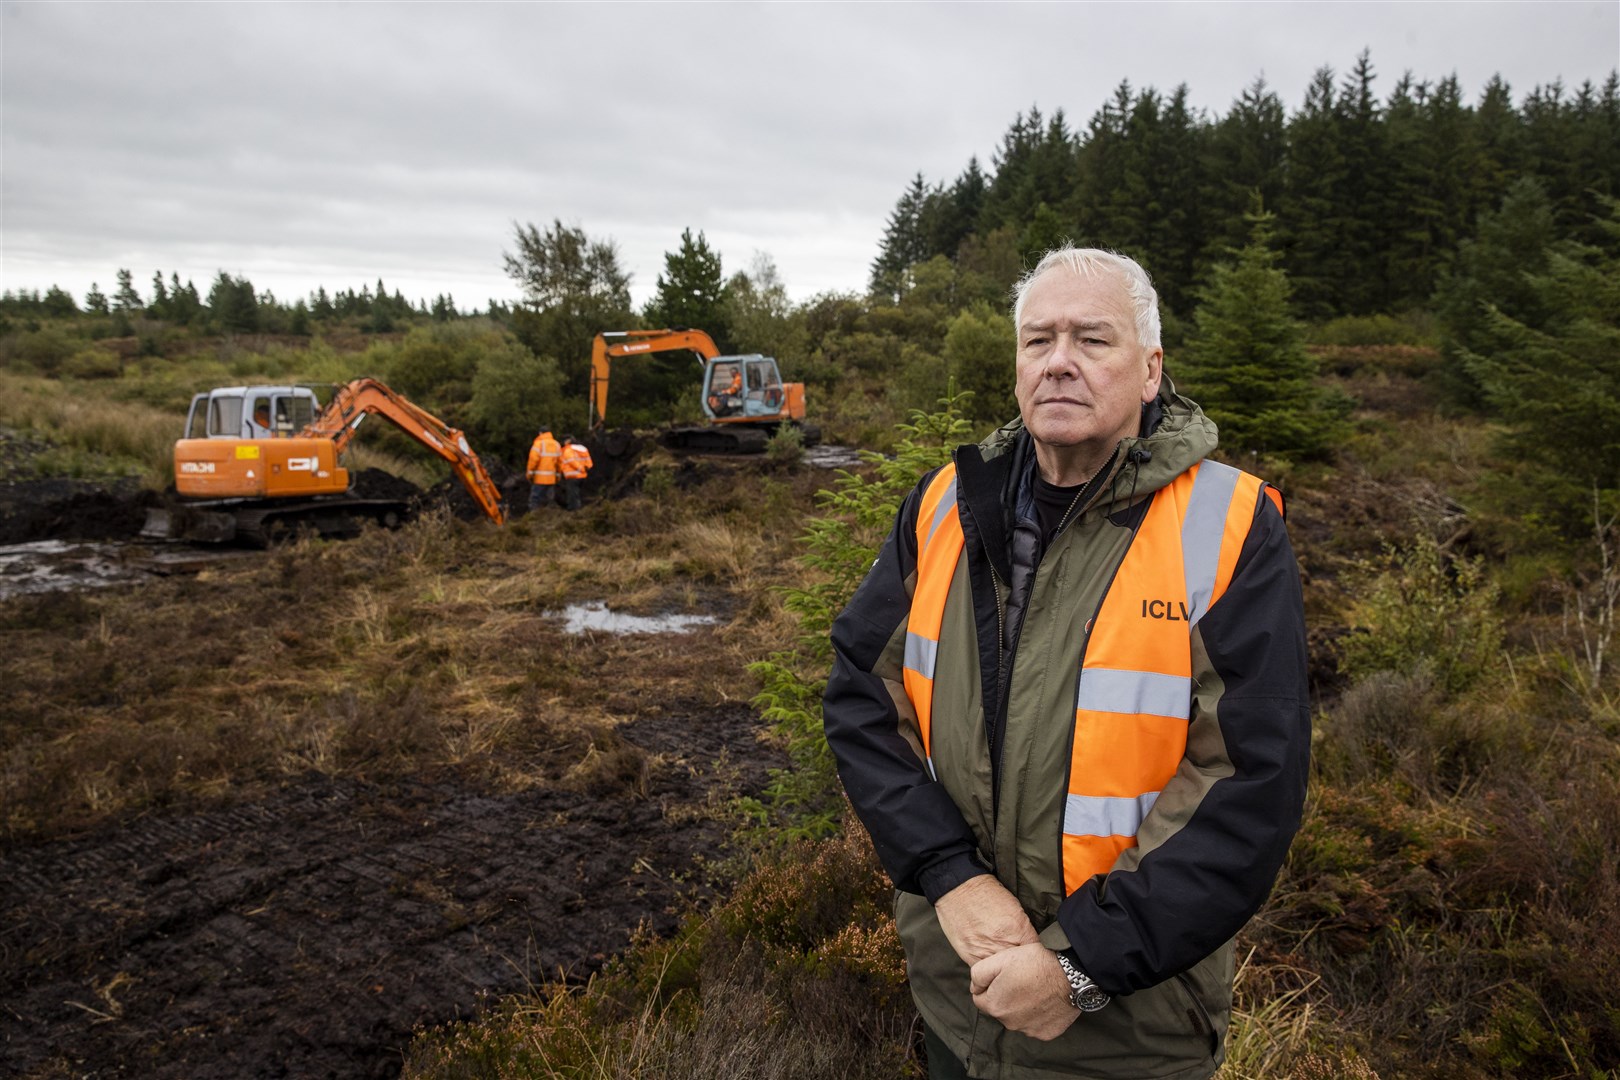 Jon Hill, of the Independent Commission for the Location of Victims’ Remains, stands besides excavators at Bragan bog near Emyvale in Co Monaghan (PA)